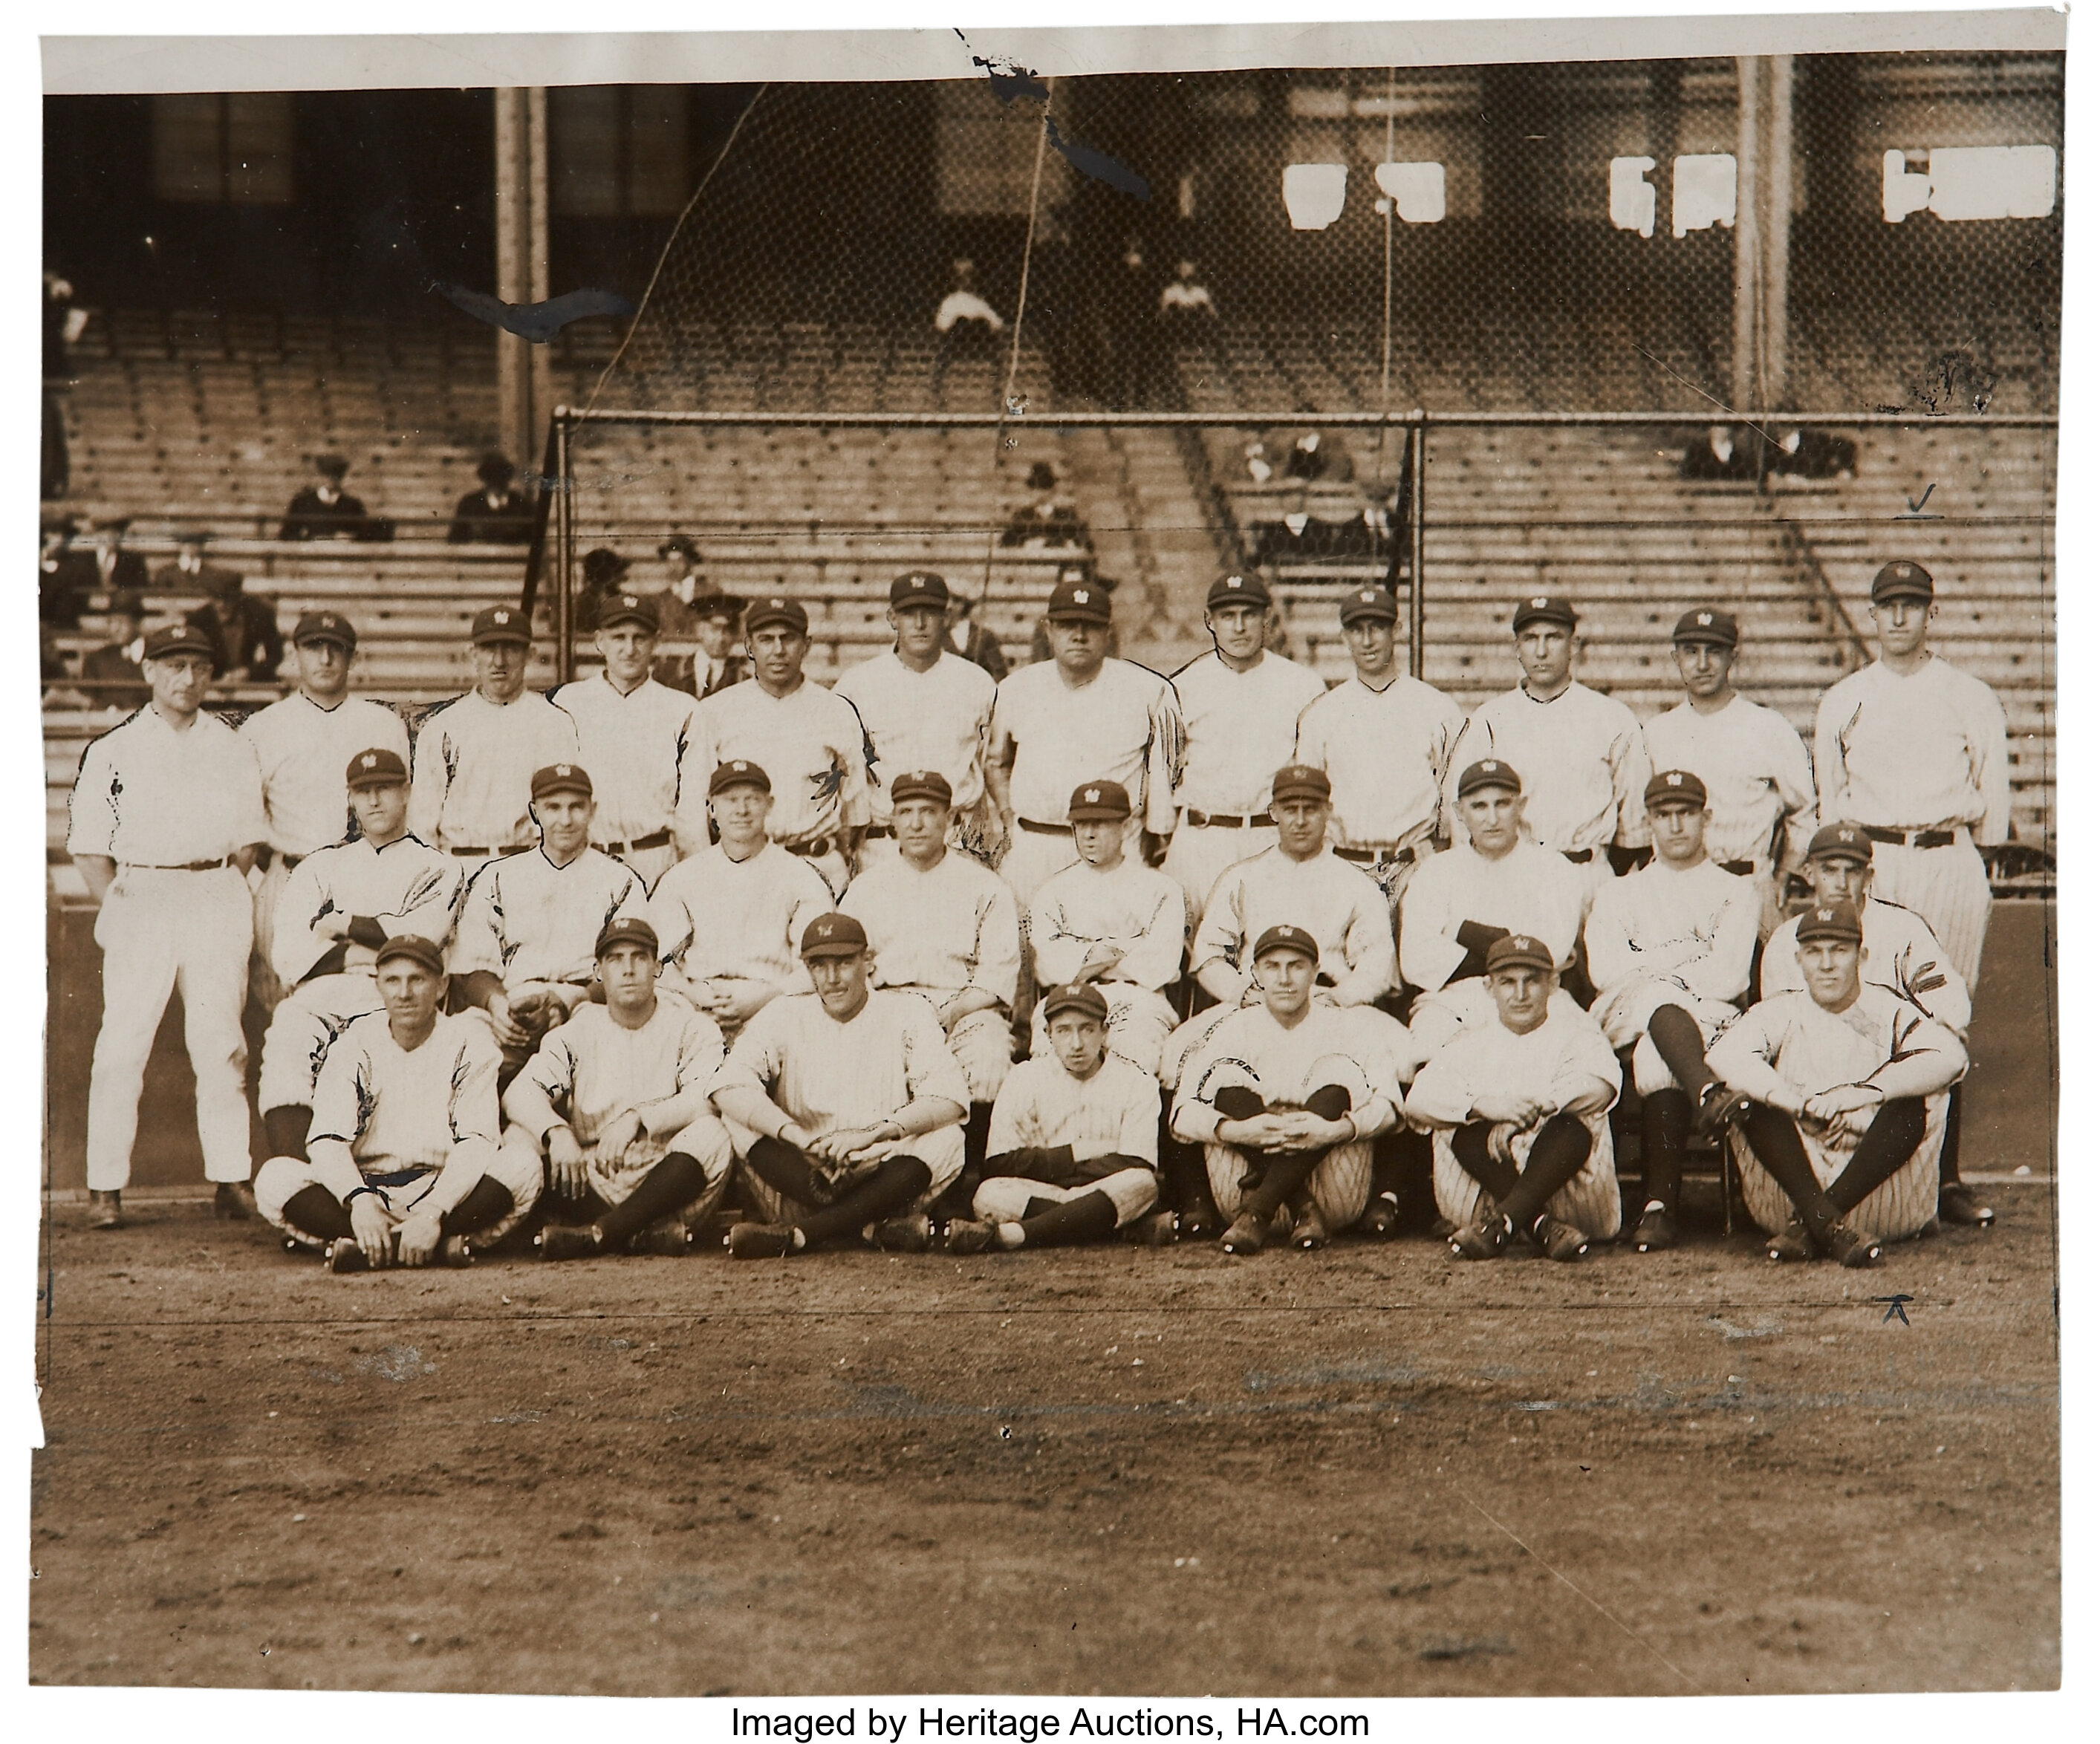 1923 New York Yankees Team Photo Mixed Media by Row One Brand - Pixels